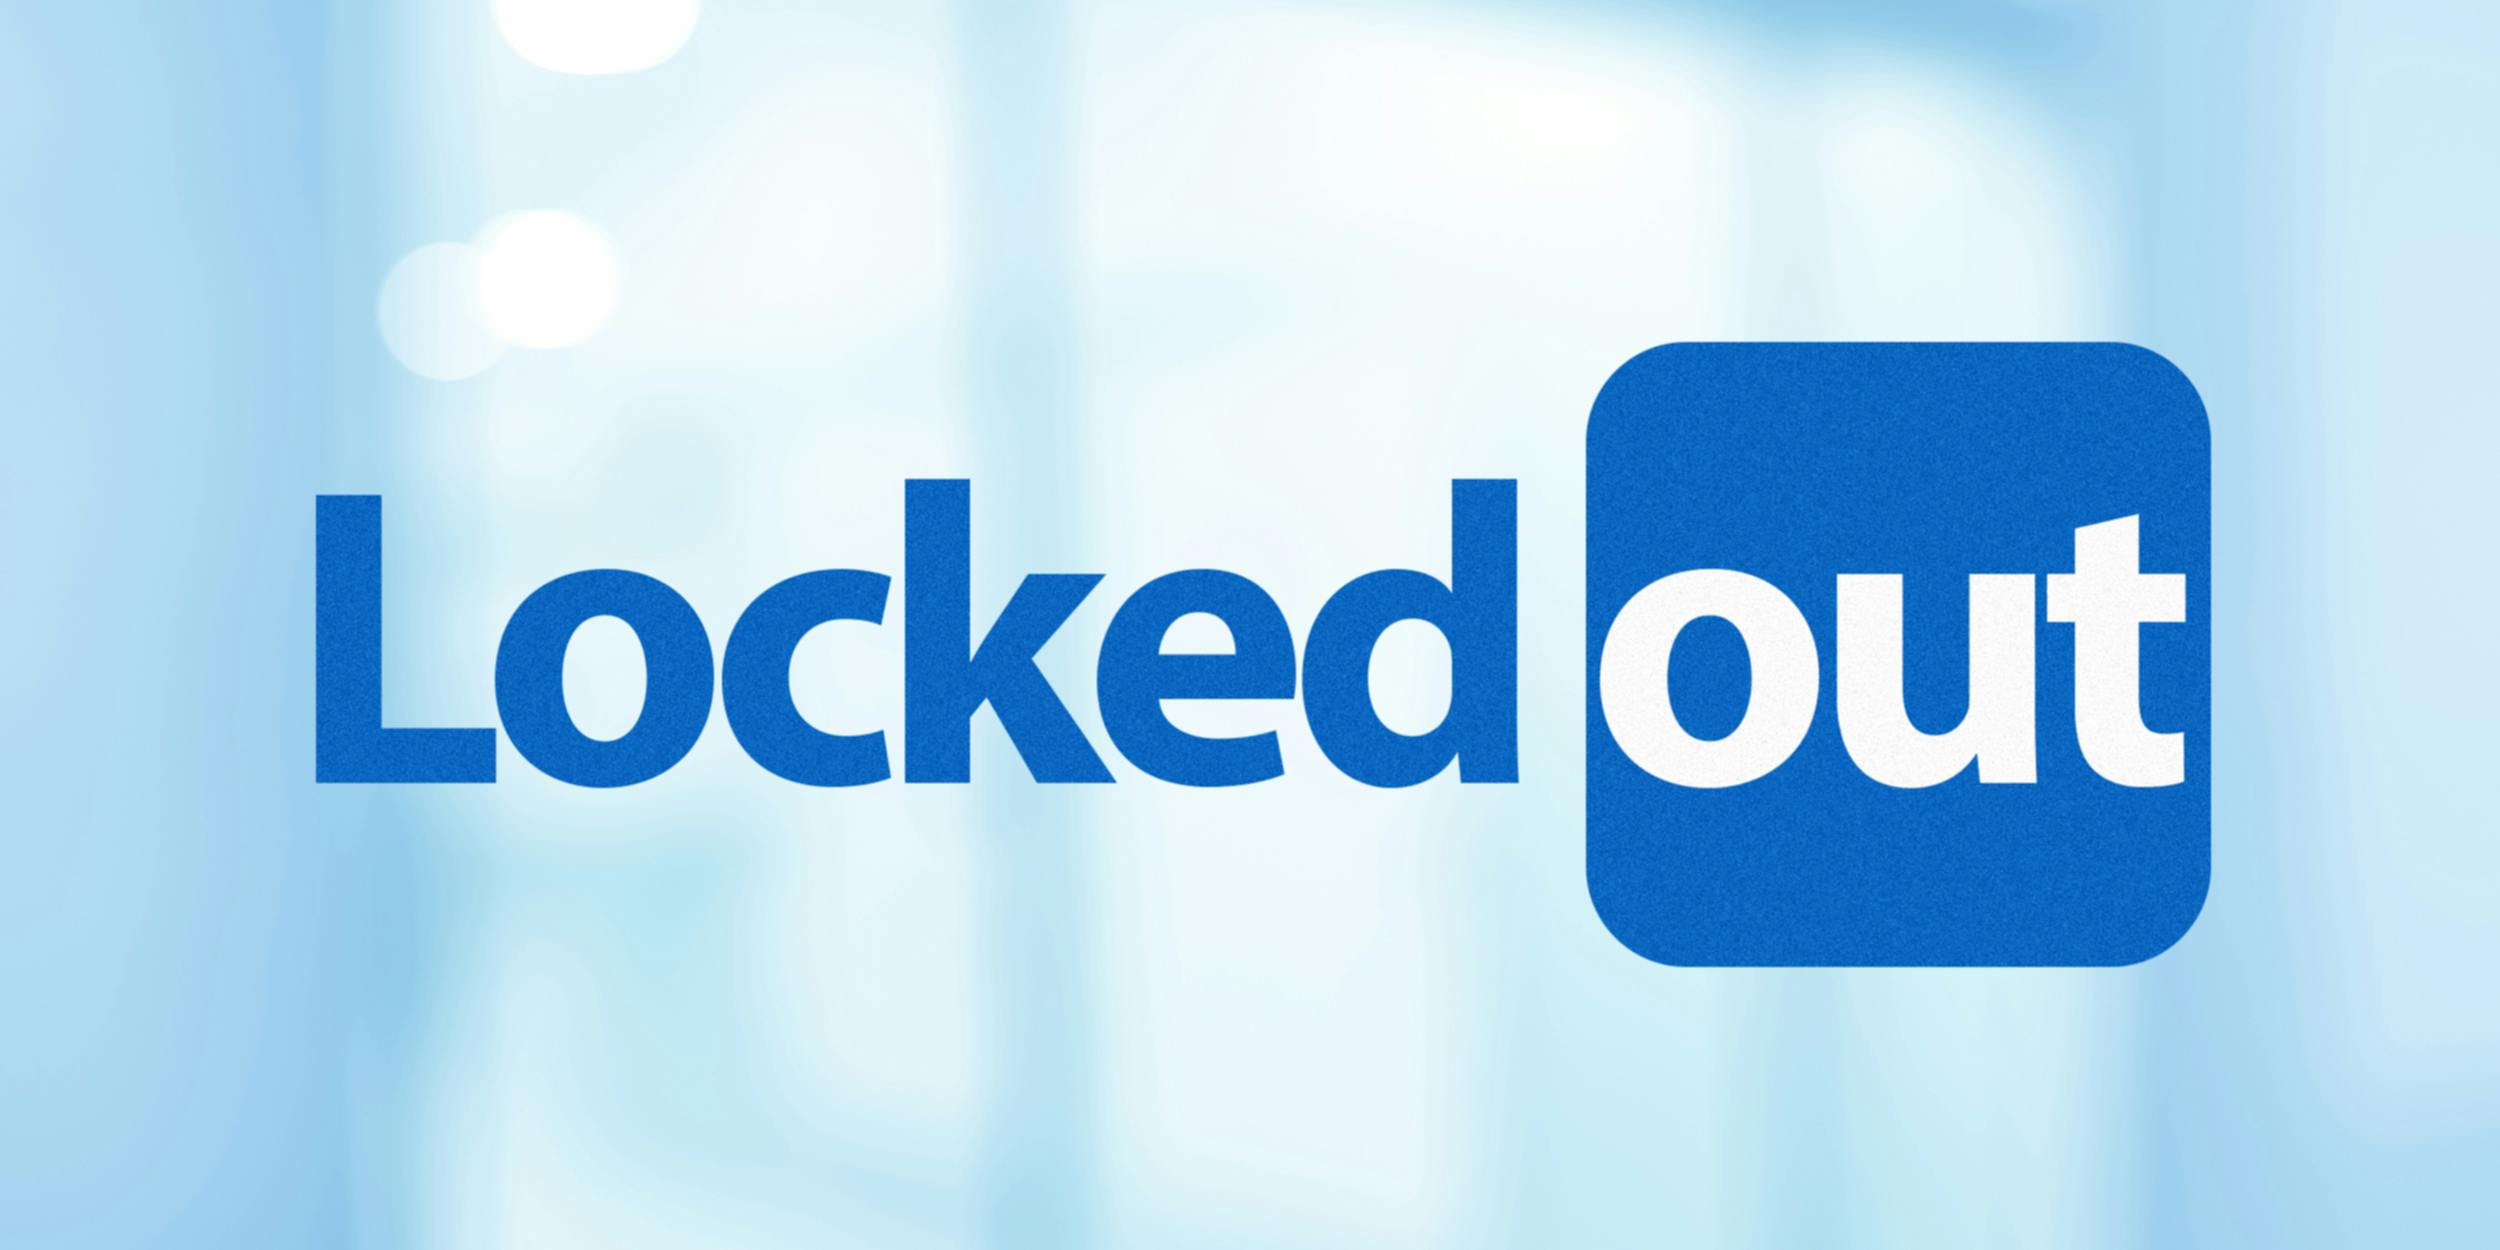 Linkedin logo reworked to say "Locked out"